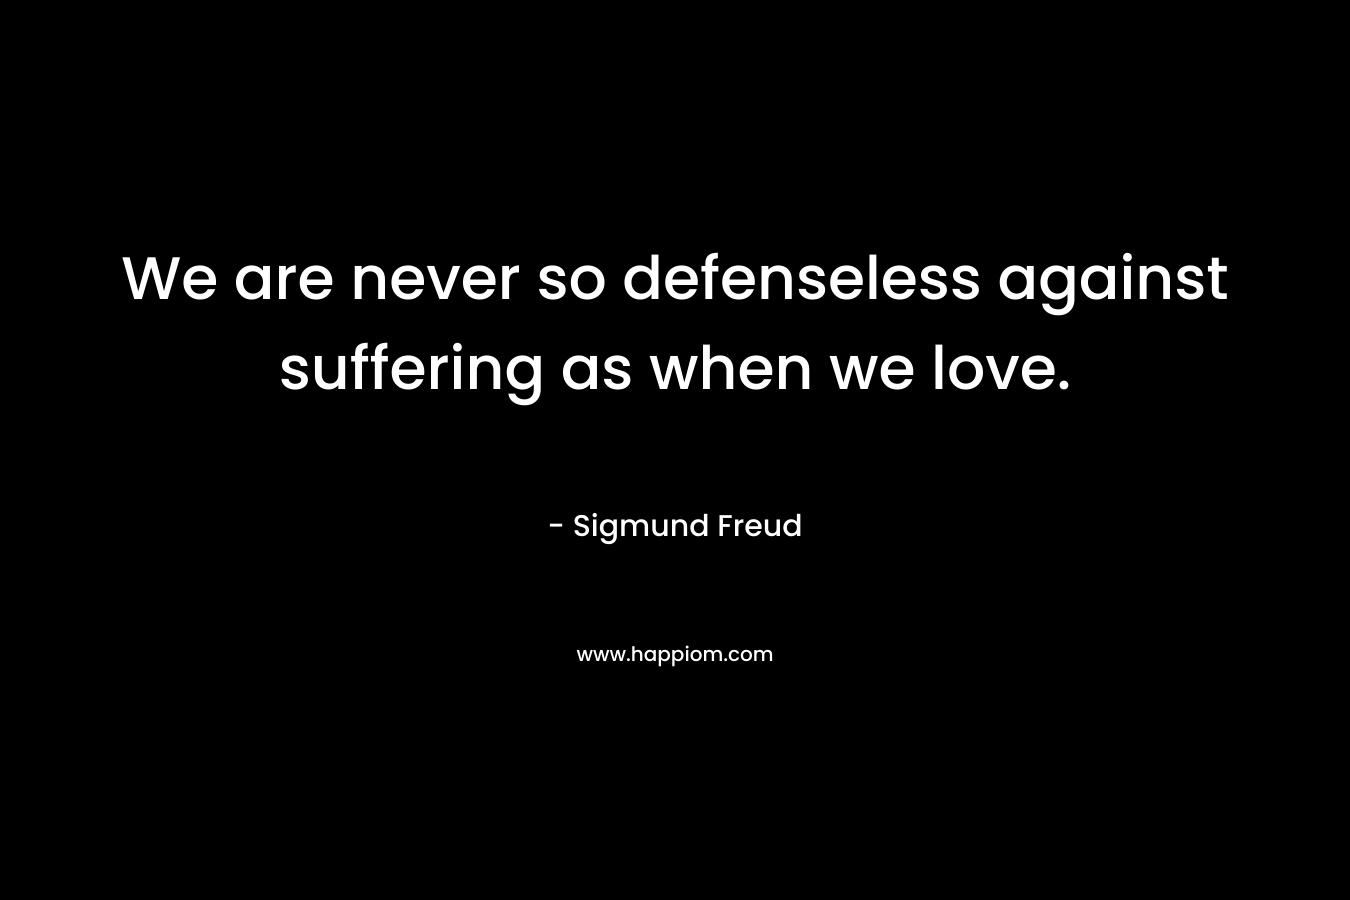 We are never so defenseless against suffering as when we love. – Sigmund Freud